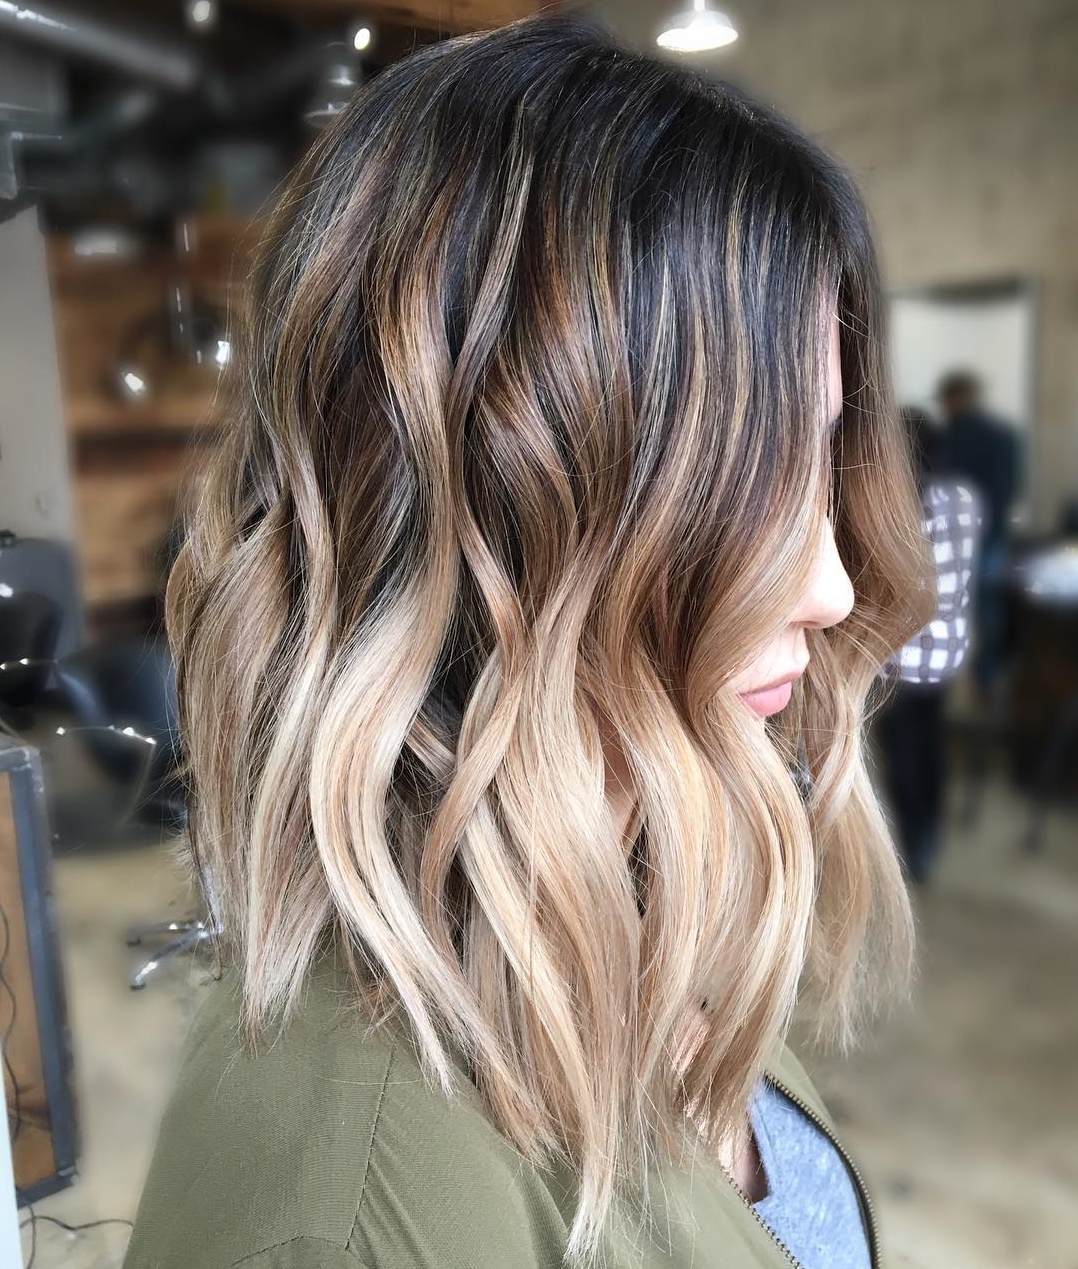 25 Fabulous Brown Hair with Blonde Highlights Looks to Love